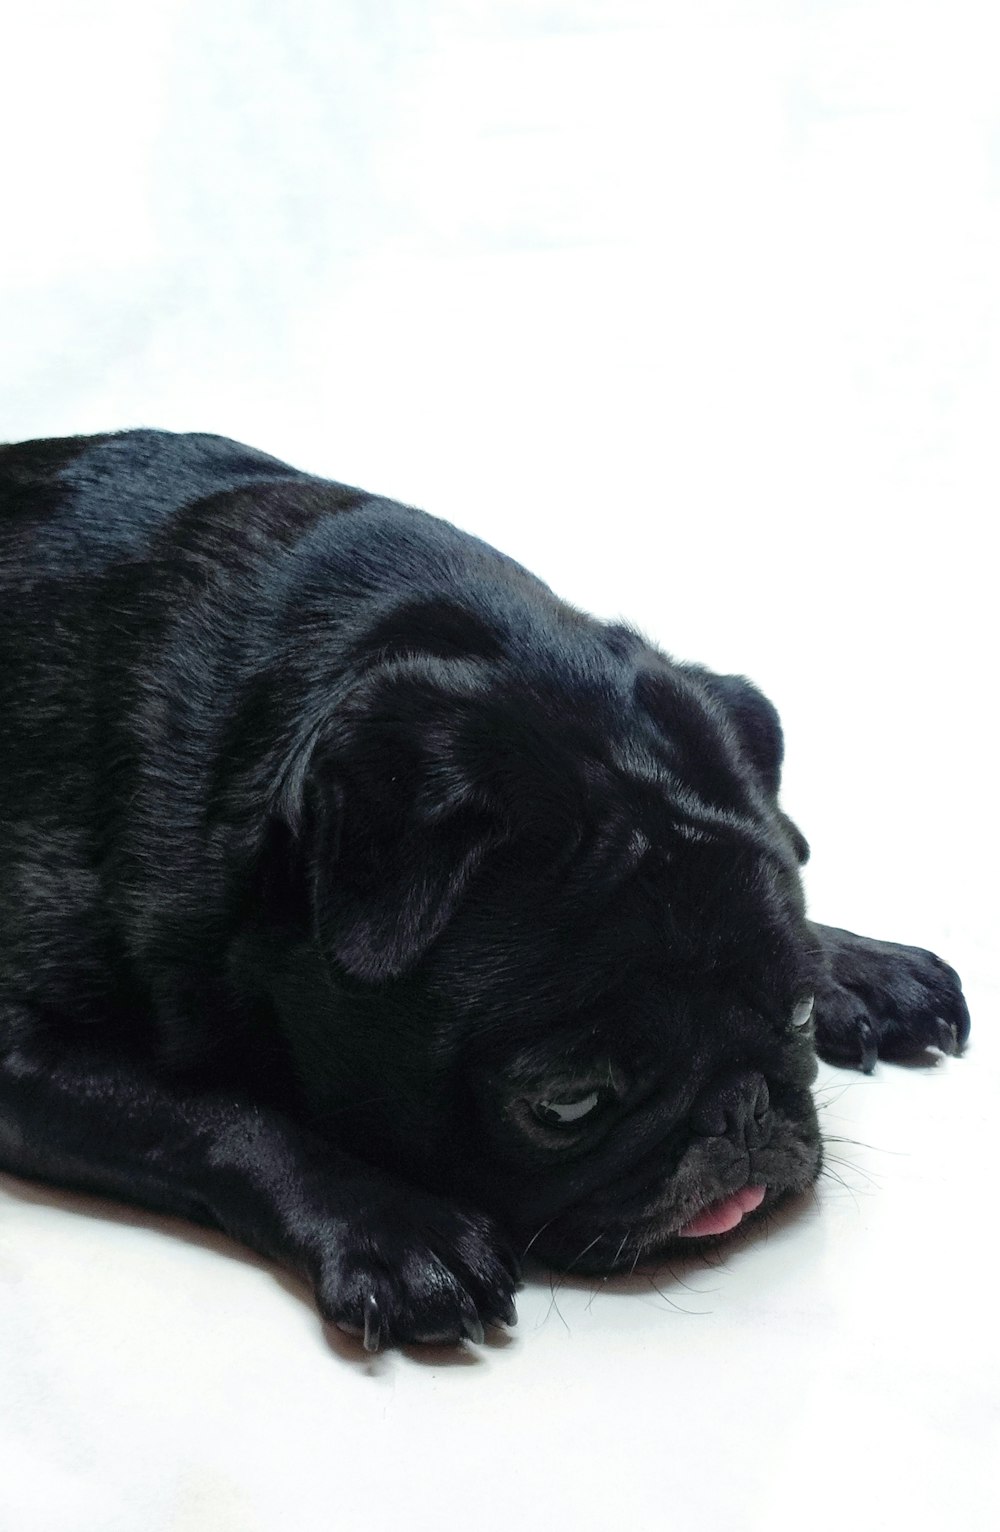 a black pug dog laying on a white surface